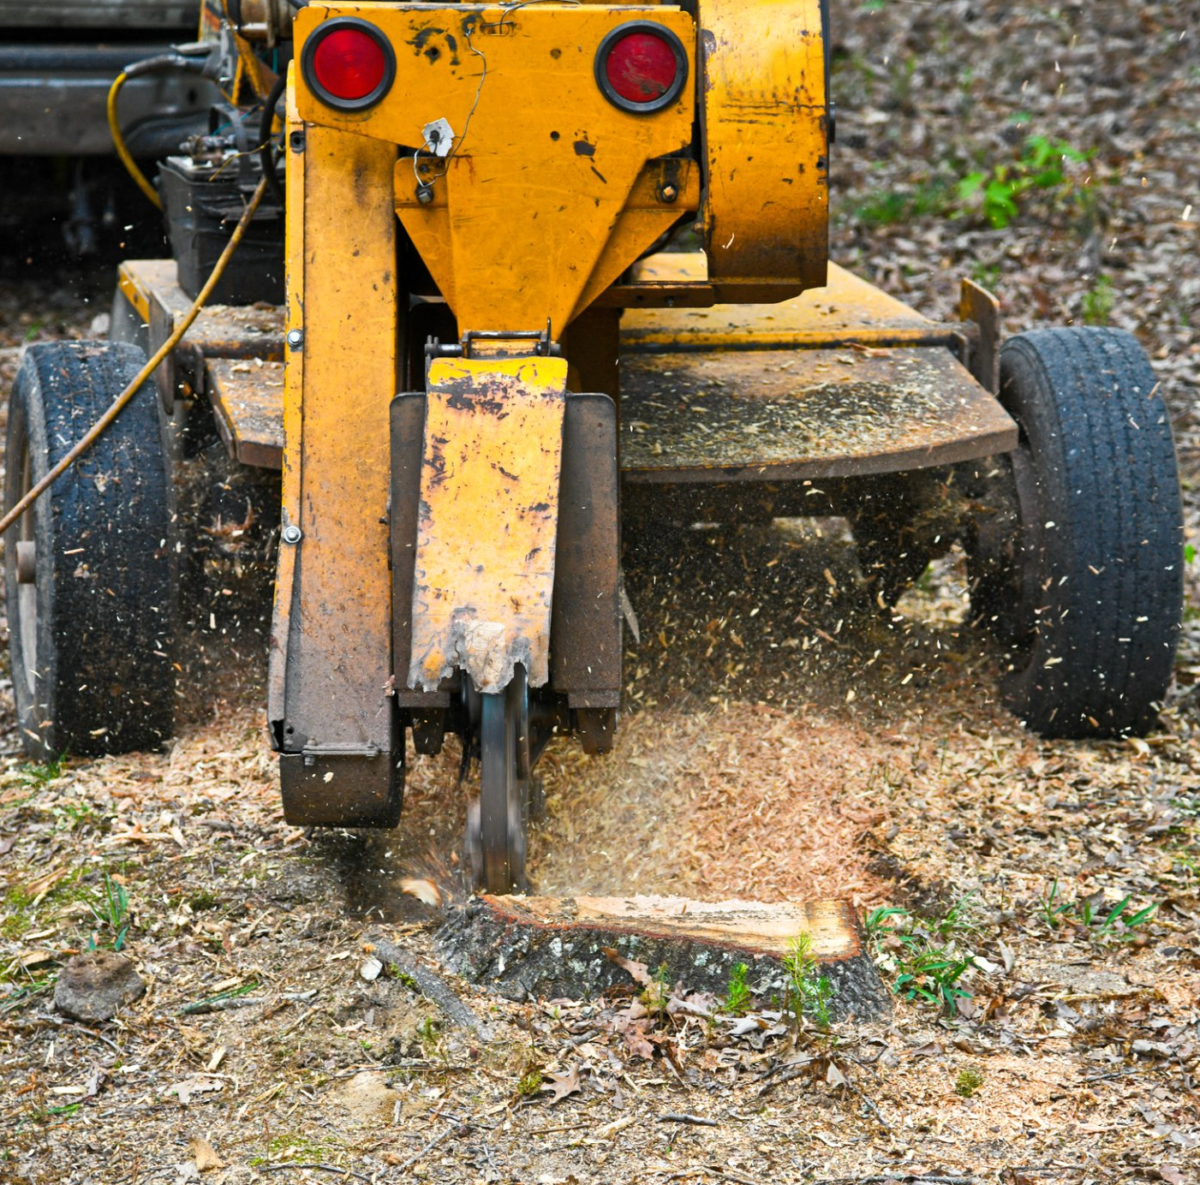 A yellow stump grinder in action, grinding down a tree stump into wood chips. The ground is covered with wood shavings, indicating ongoing work. The grinder's rotating blade is visible, cutting through the stump.